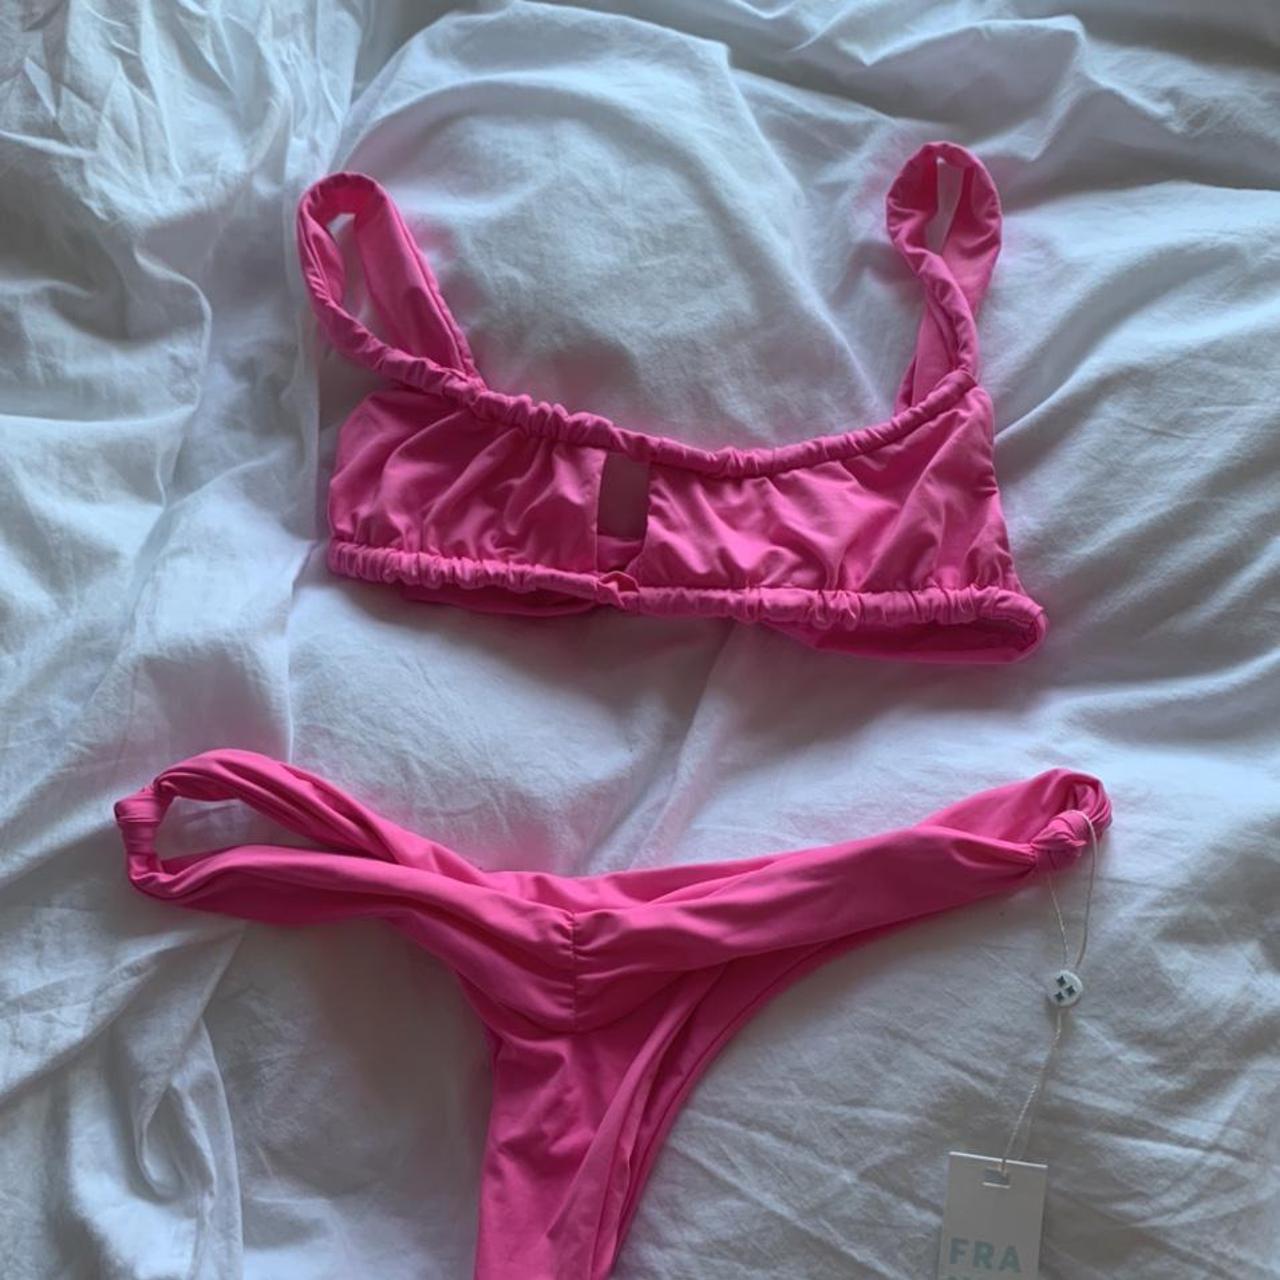 Product Image 1 - Frankie’s Bikinis Pink Set
Top: Small
Bottoms: